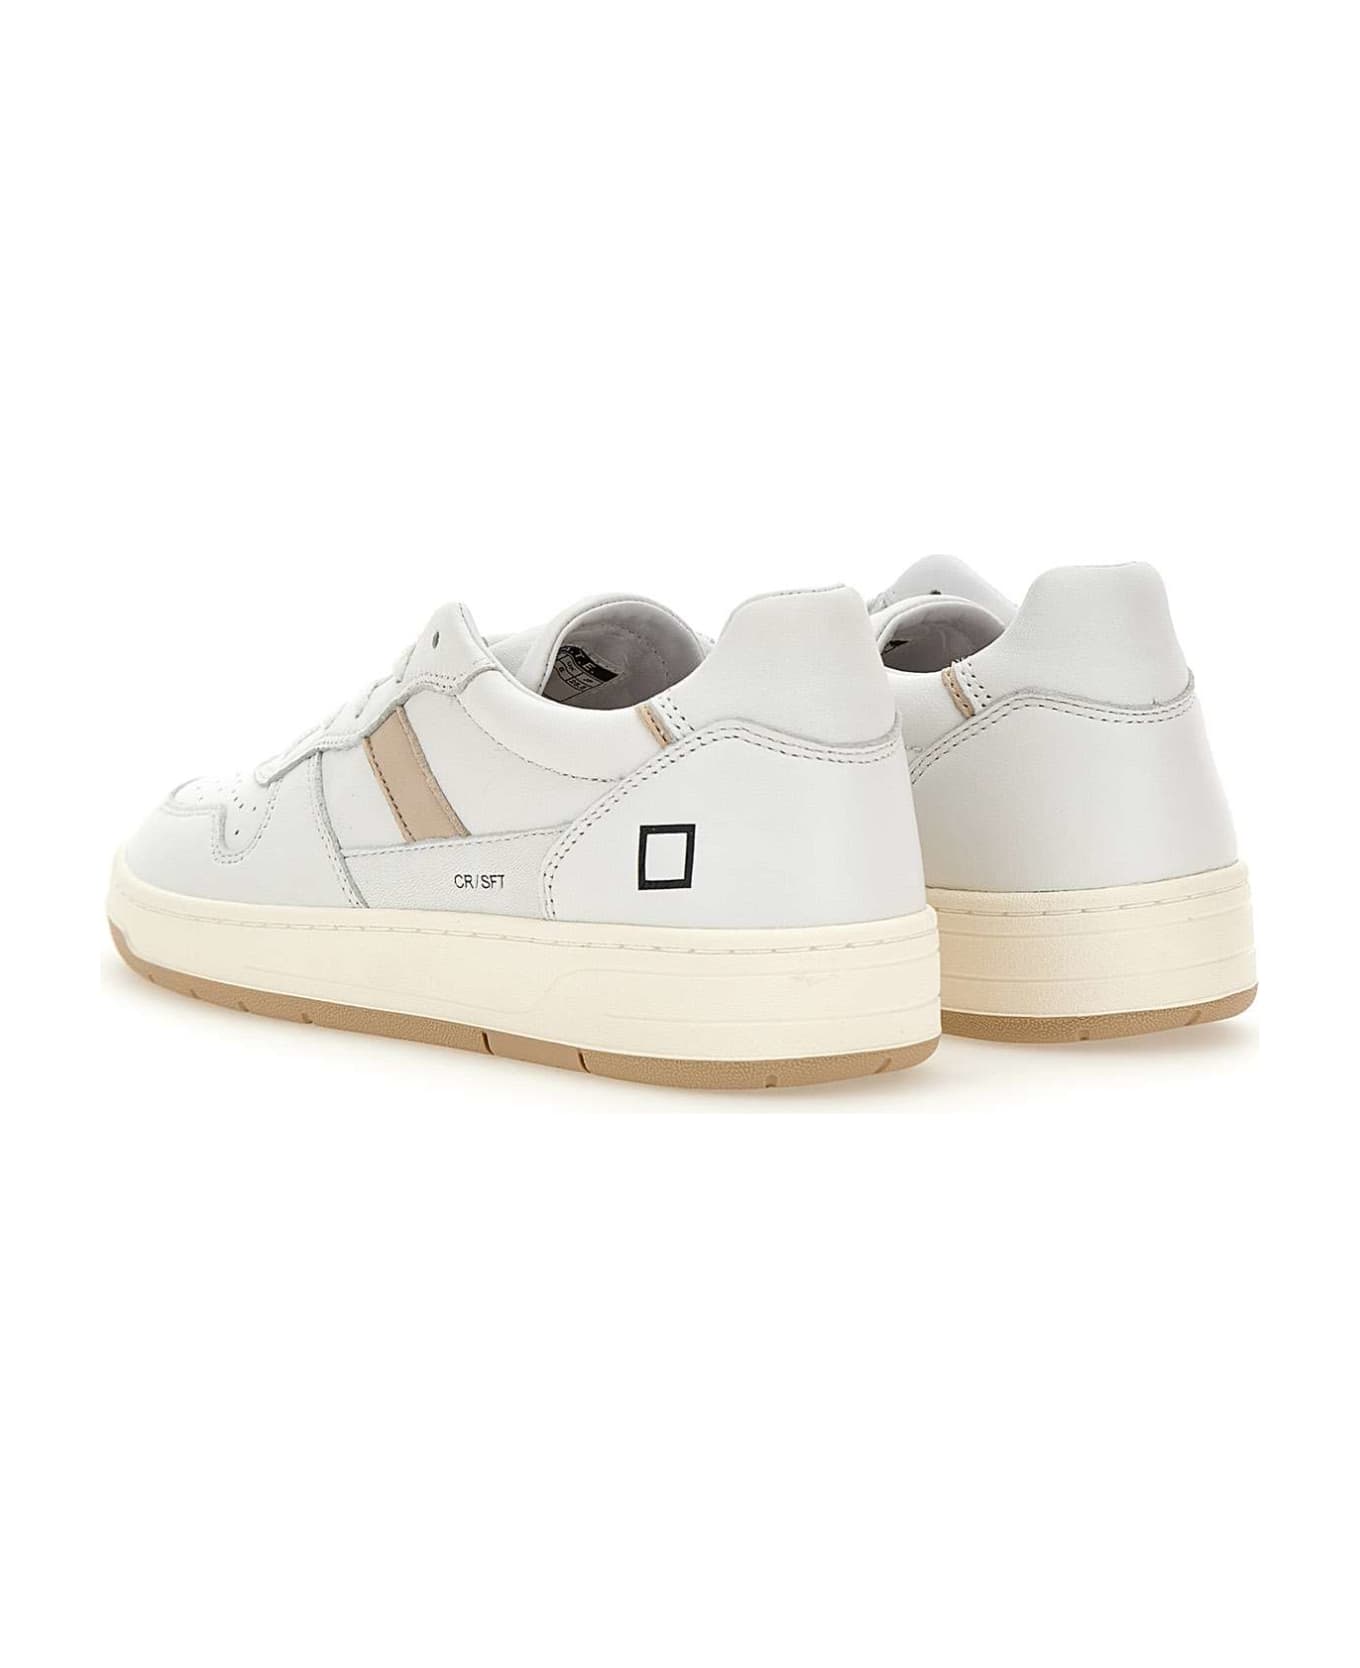 D.A.T.E. "court 2.0 Soft" Leather Sneakers - WHITE